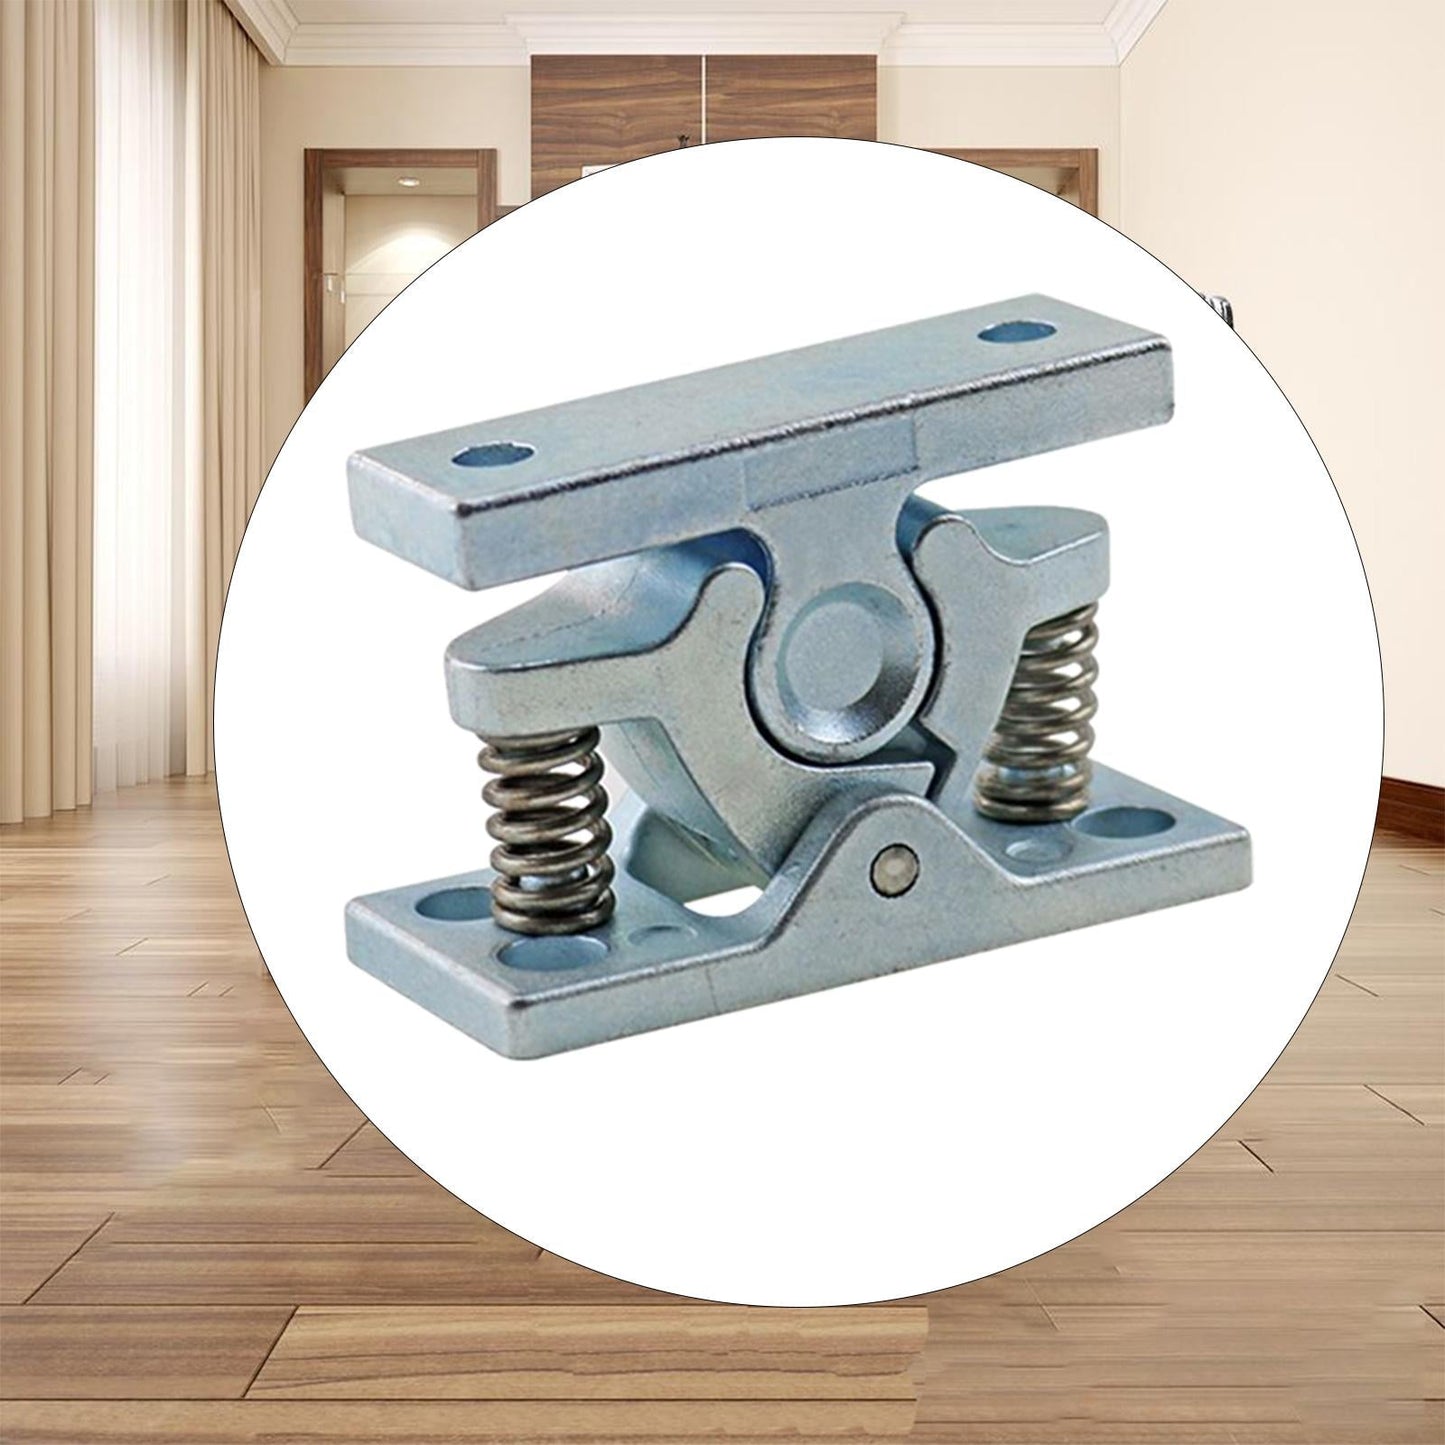 Super Hold Heavy Duty Door Stopper Tool - UTILITY5STORE